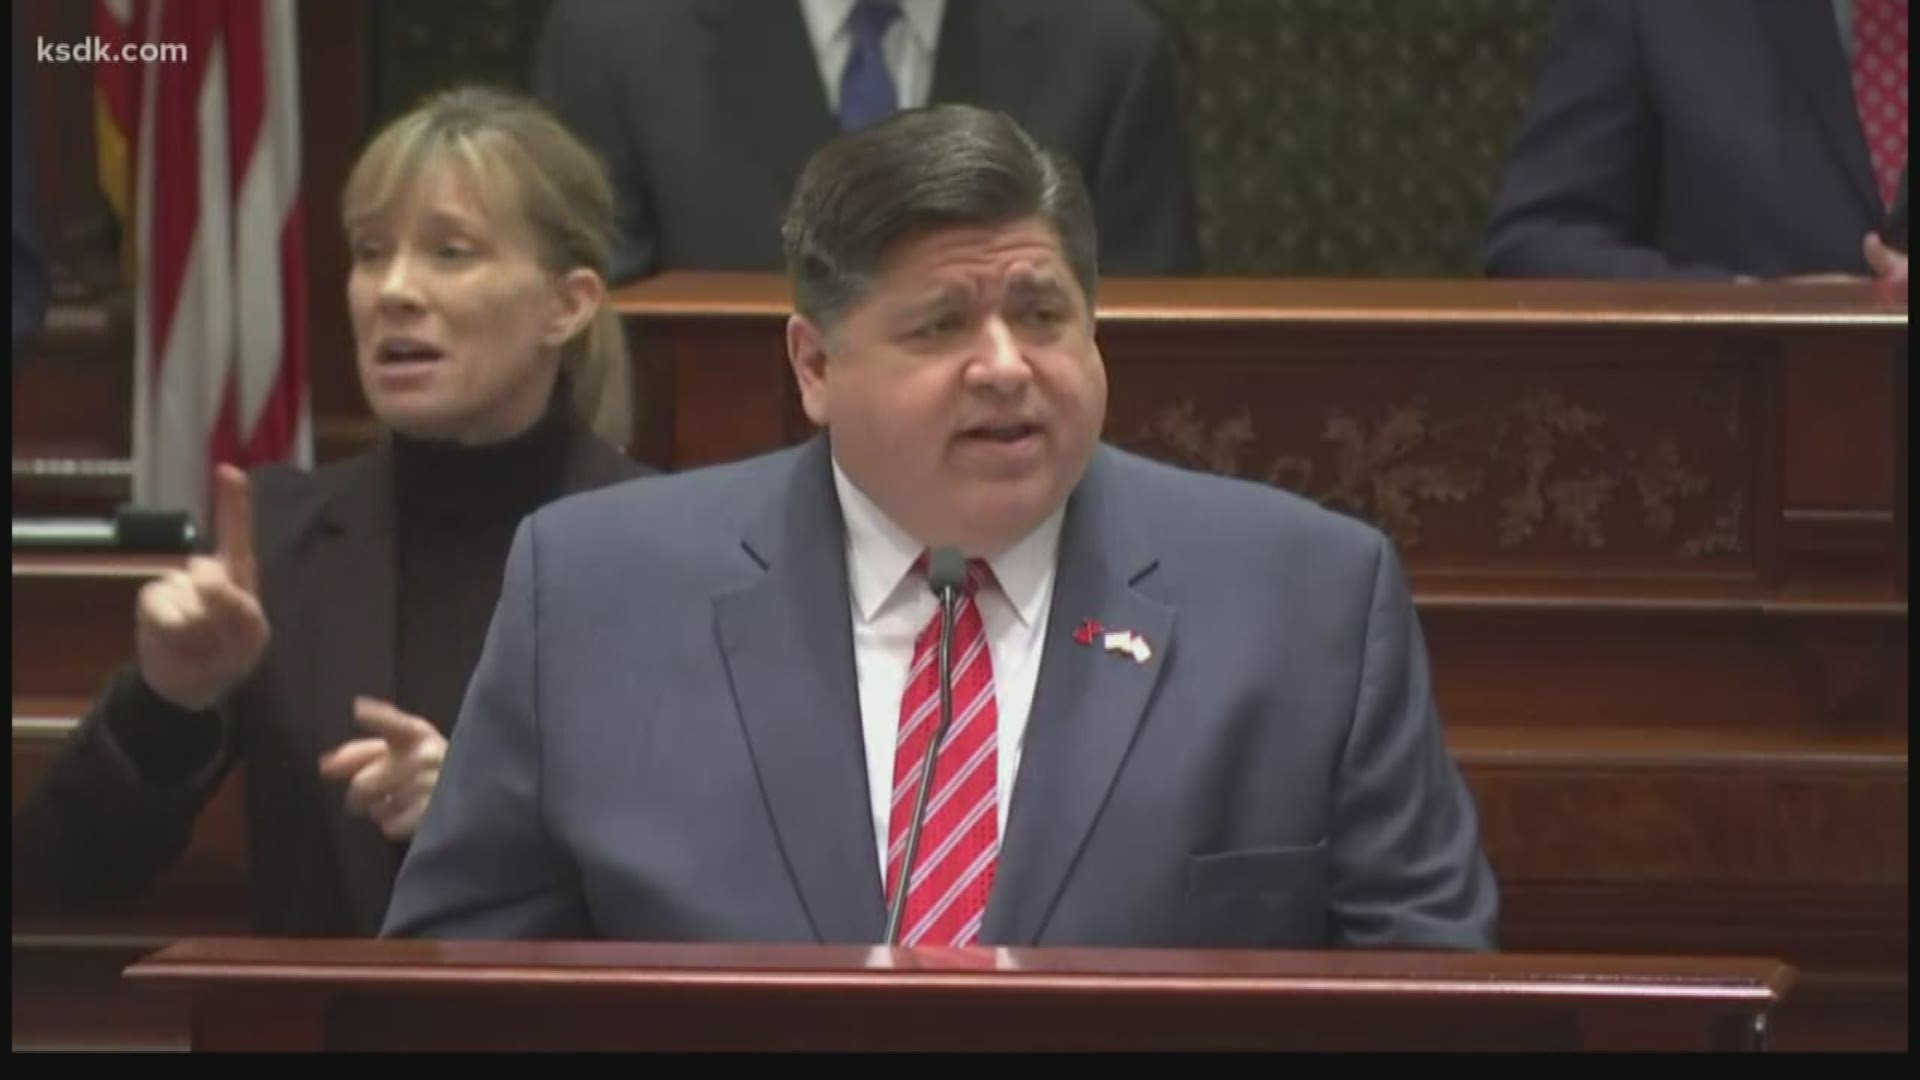 Ahead of the address, Pritzker outlined a list of proposed government efficiencies that he projected will save the state $225 million a year.